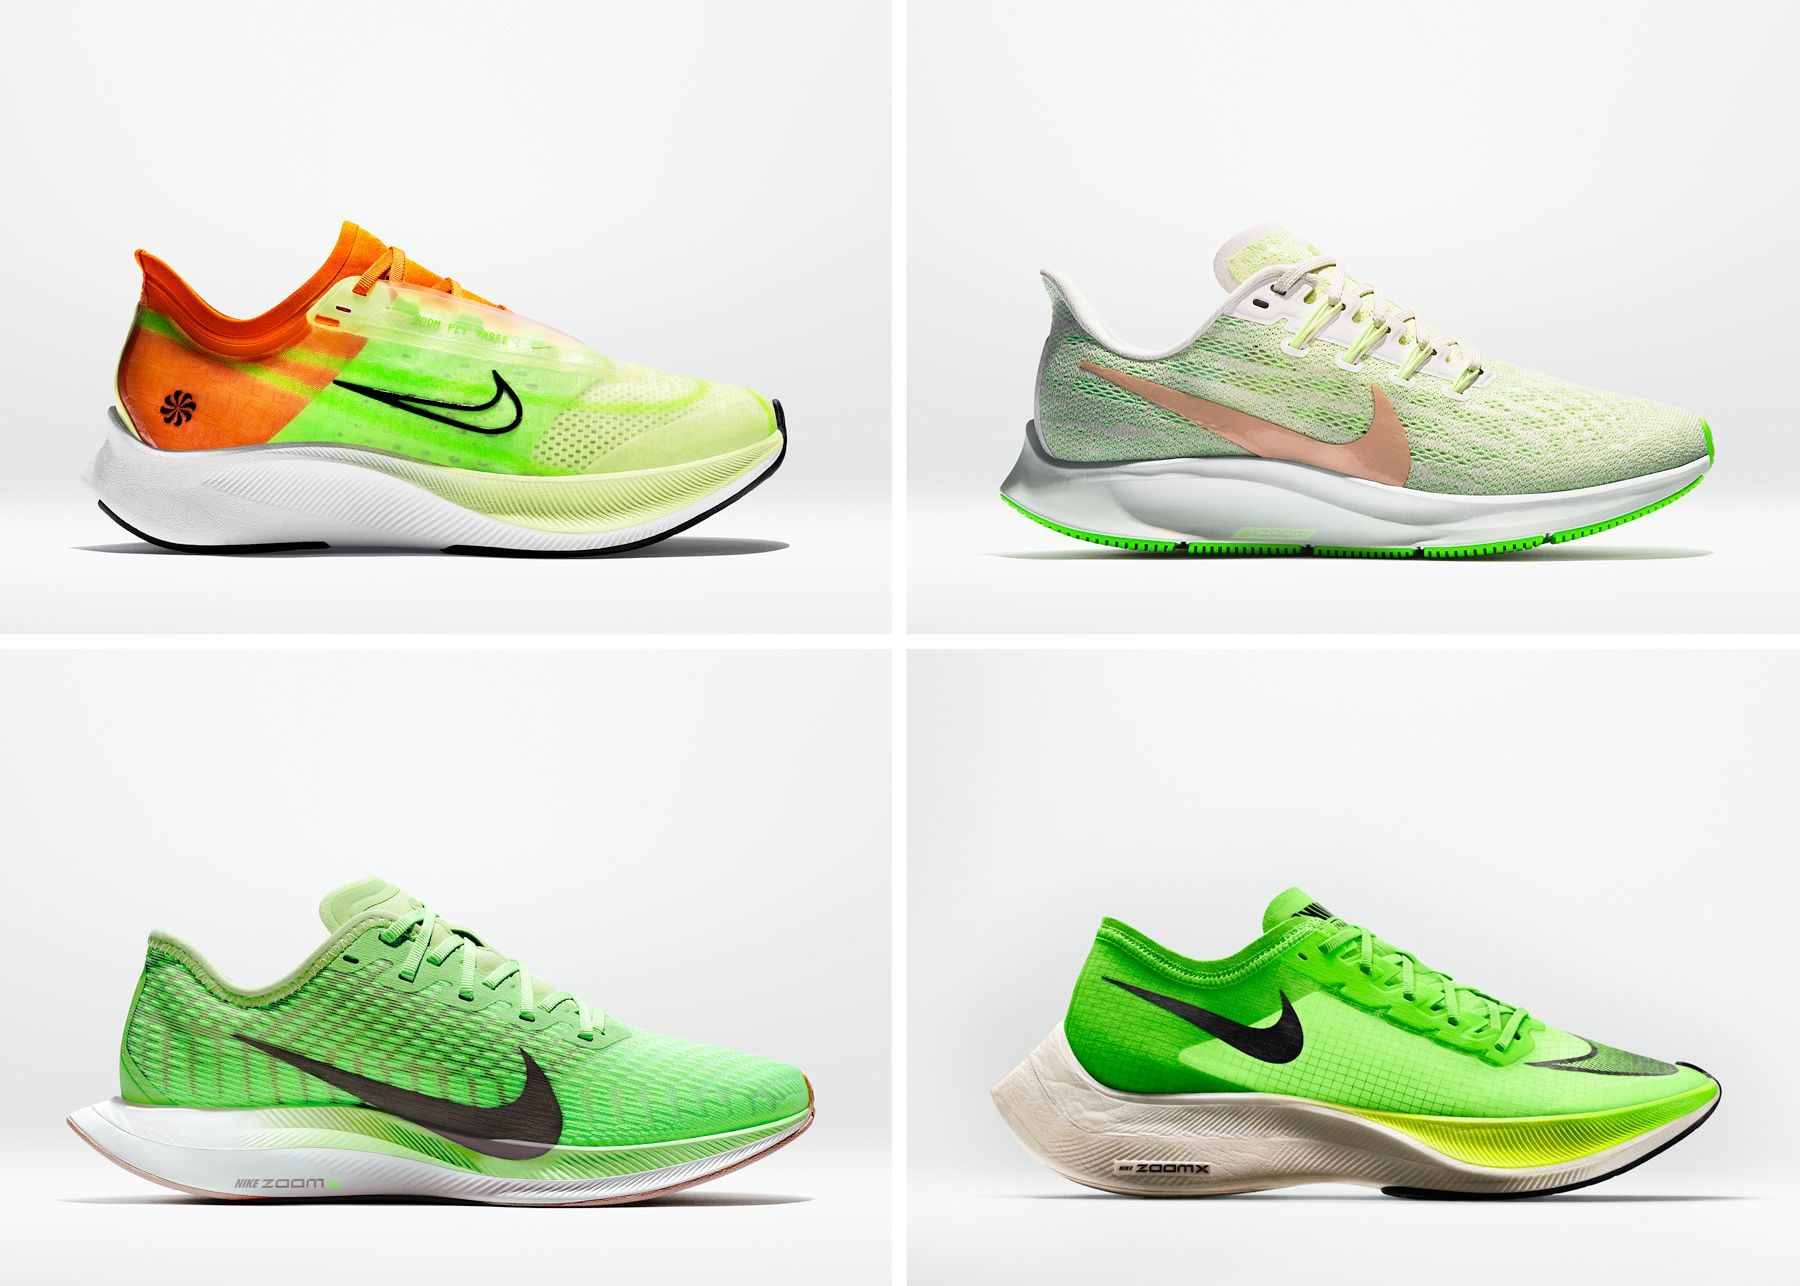 Nike Air Zoom Pegasus 36 and Zoom Fly 3 | New Nikes 2019 شعر بني